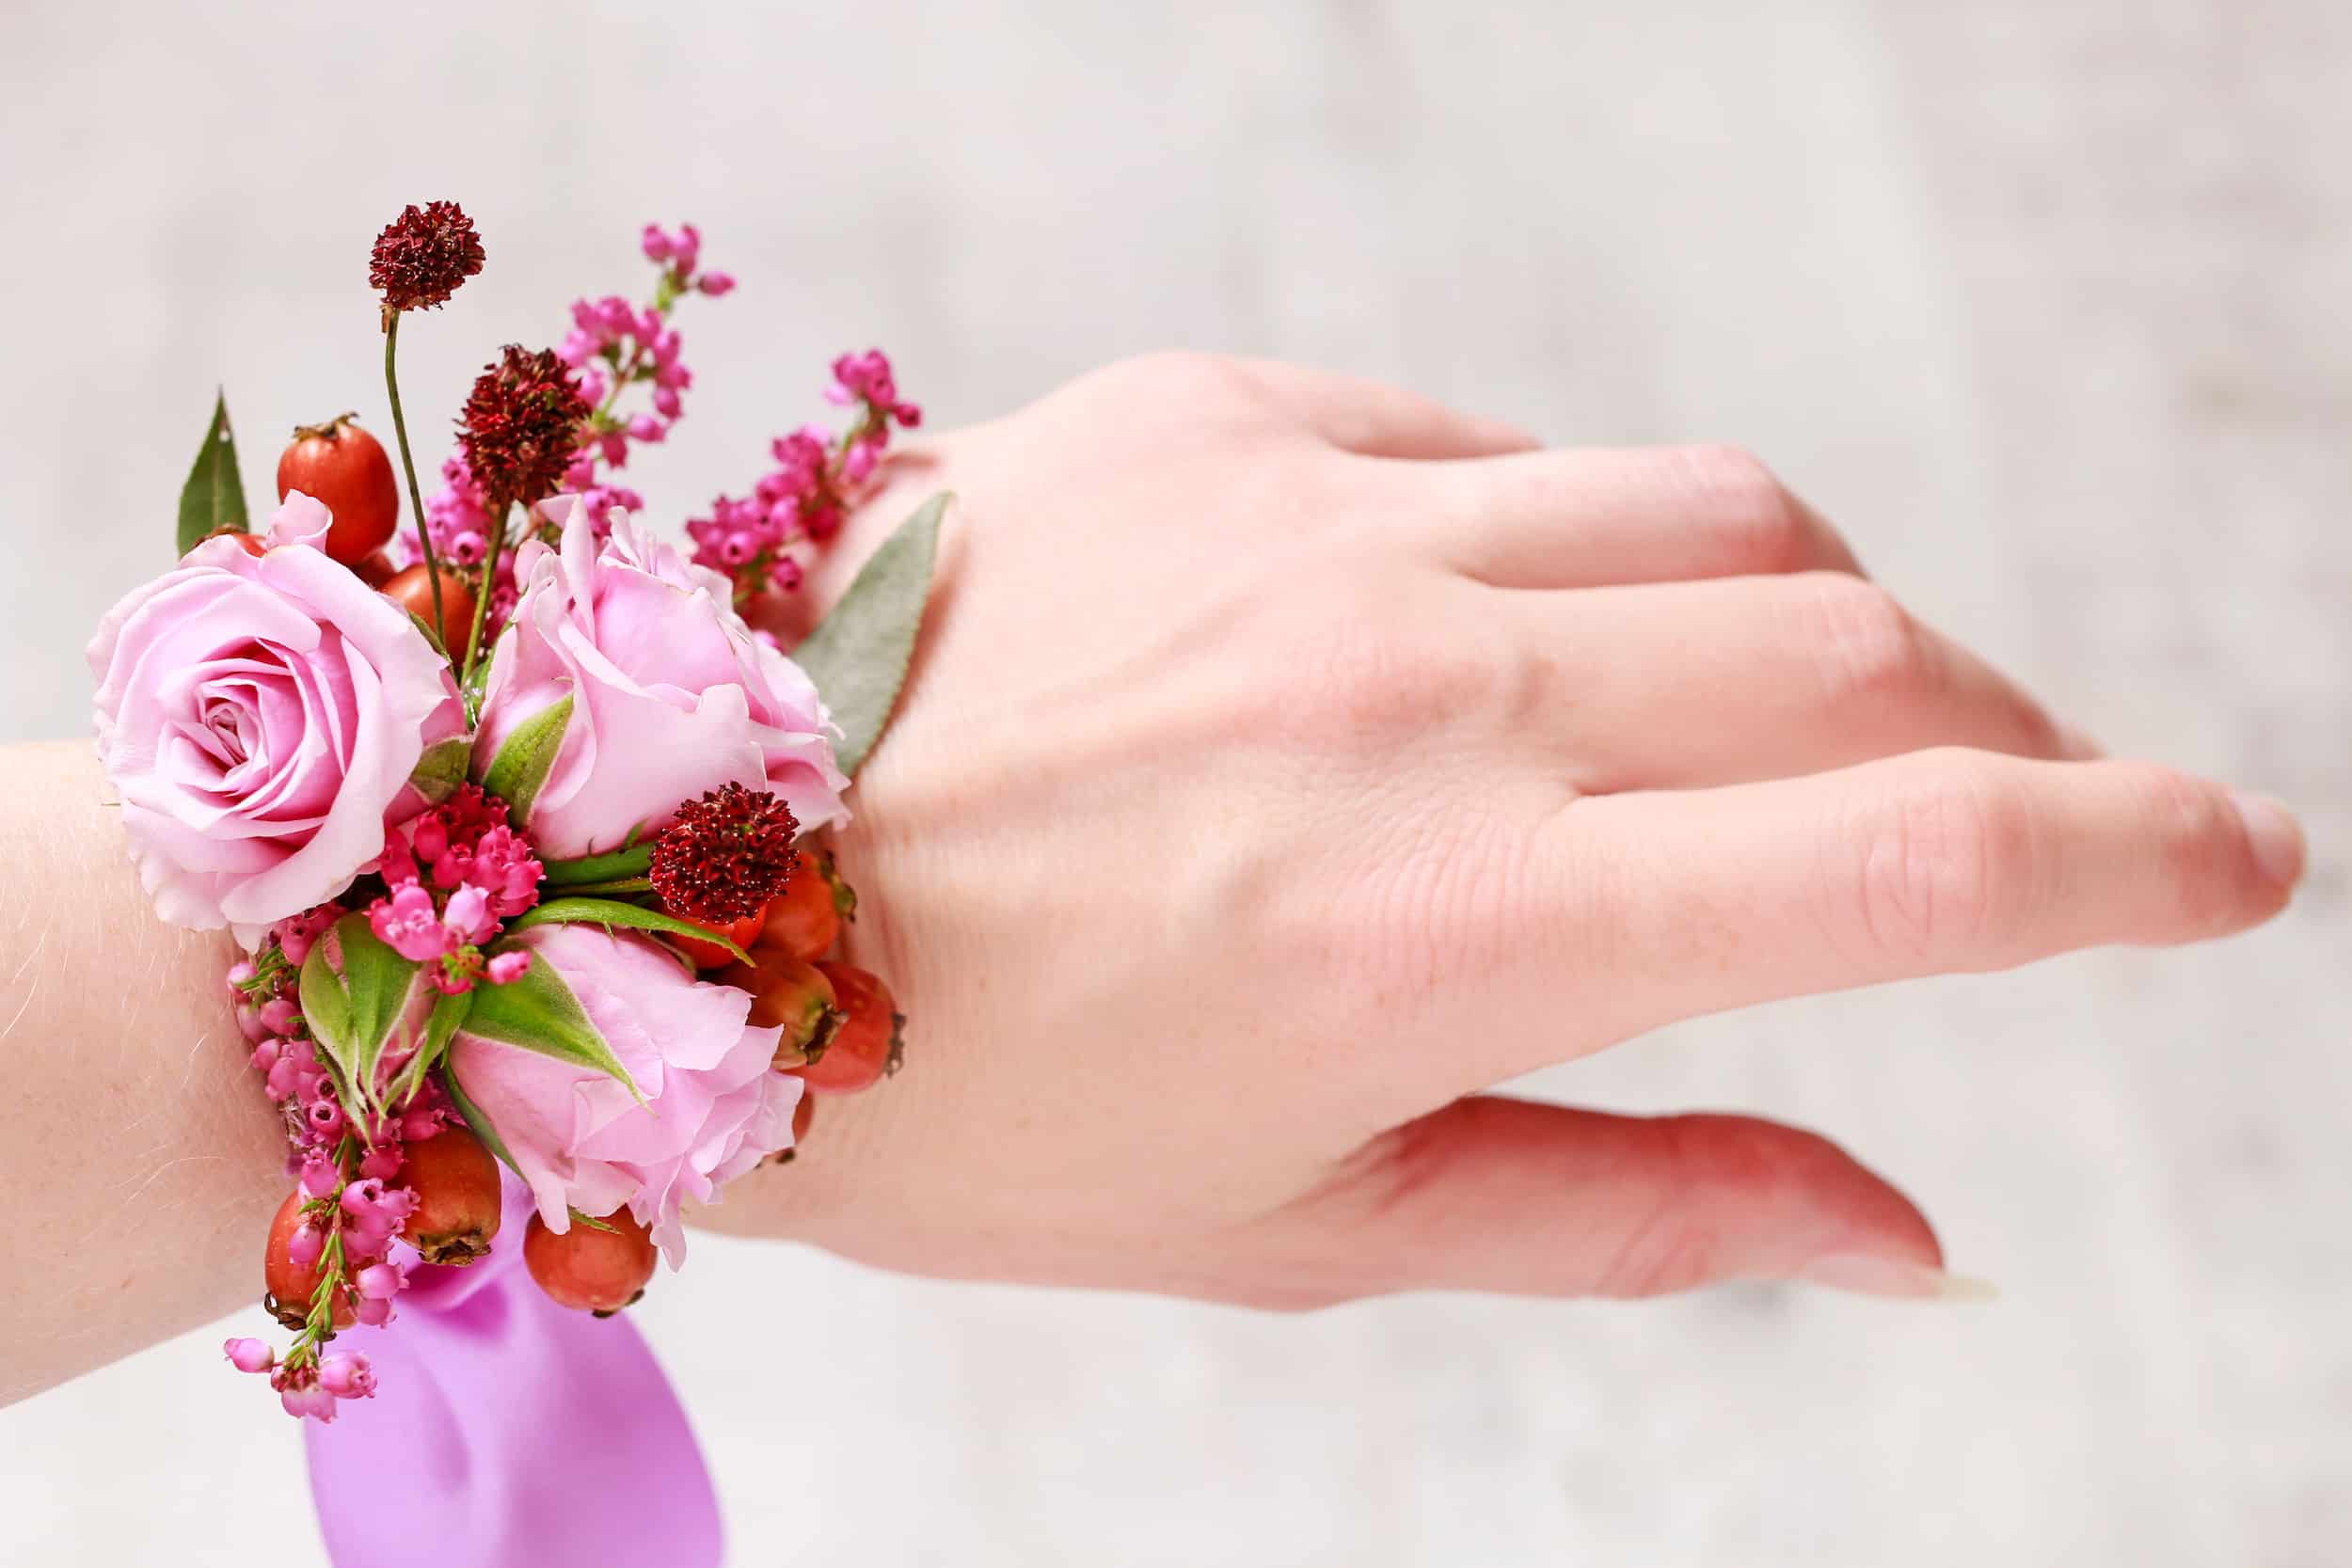 Dry Flower Natural Wrist Corsages, Baby's Breath Corsage Bracelet, Dry  Flowers Bracelet, Handmade Bridesmaid Wrist Corsages, Mother Bracelet 